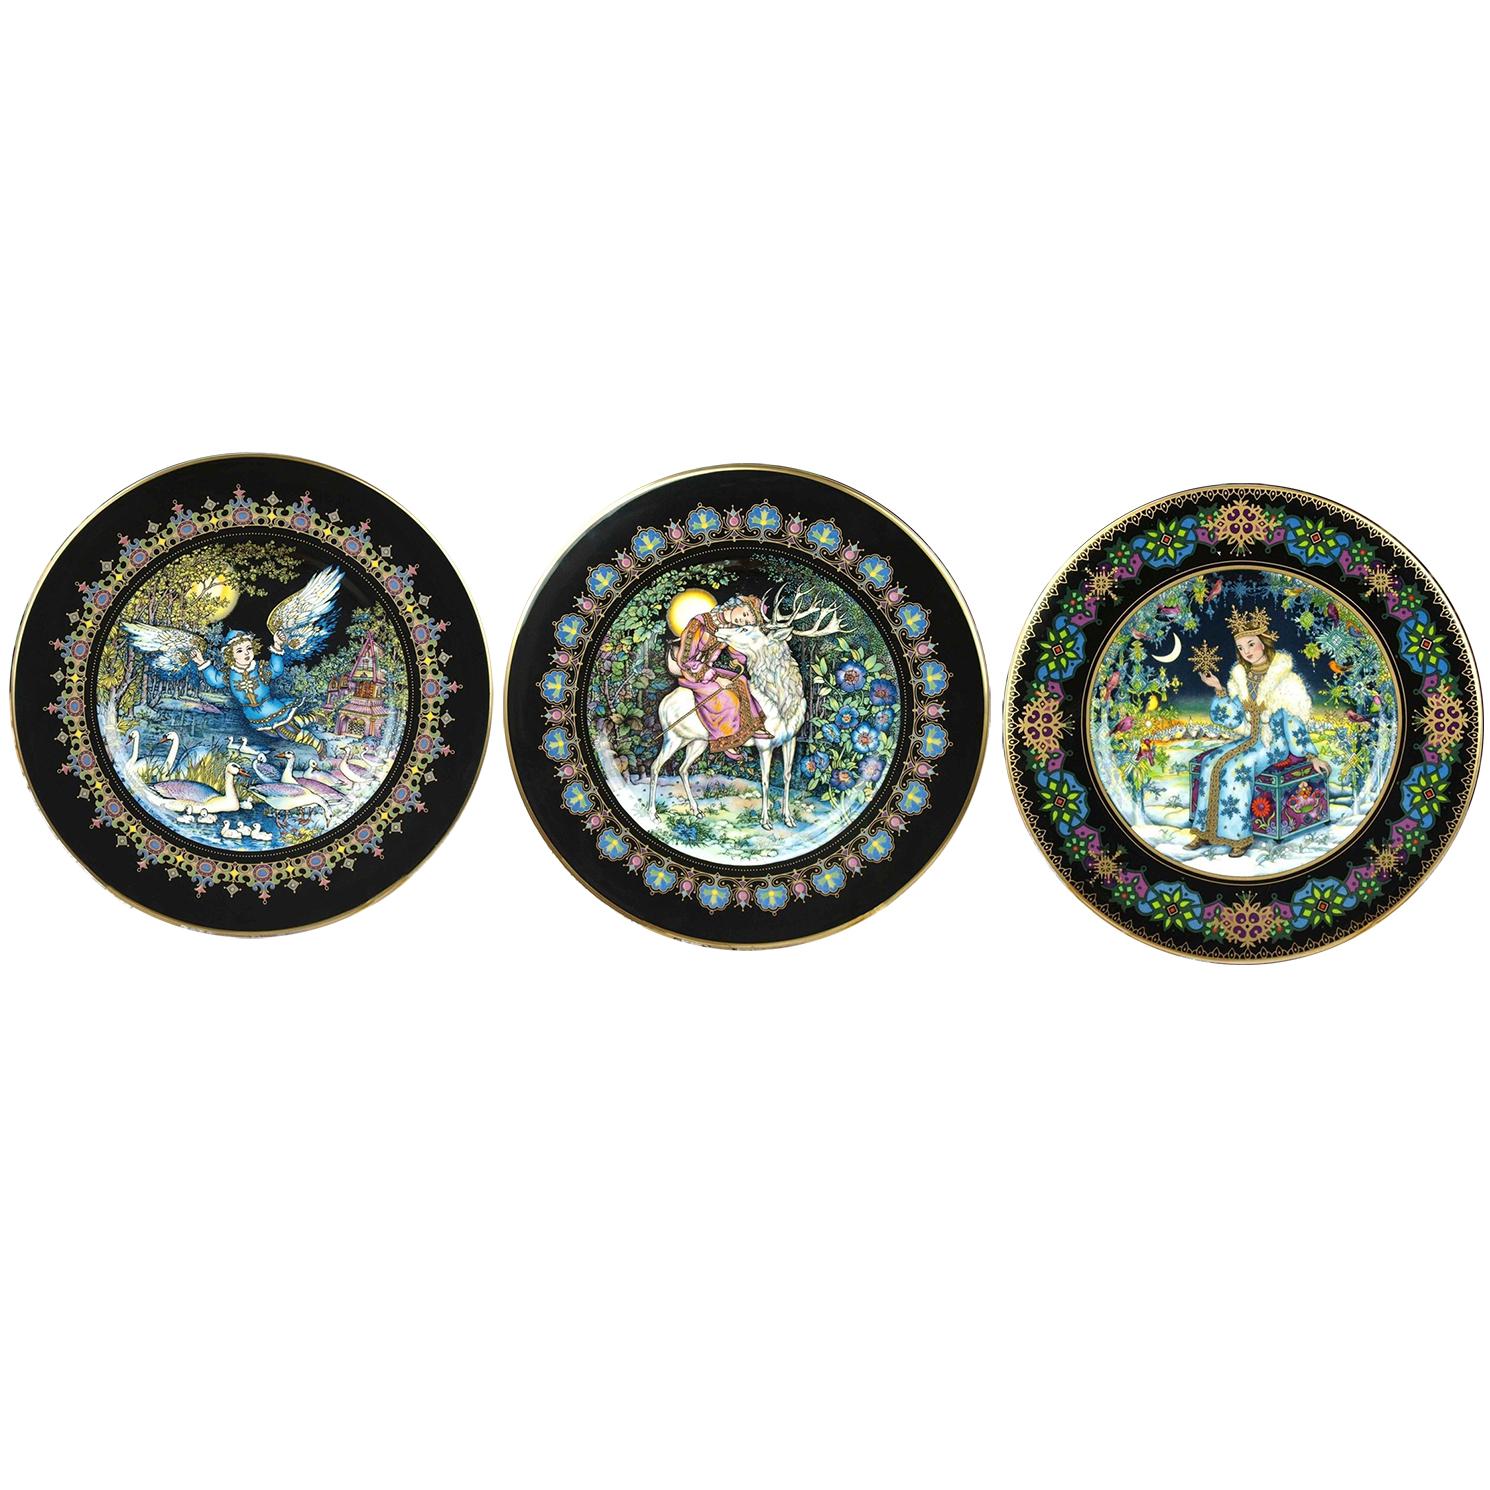 German Three Magical Fairy Tales Old Russia Plates by Gere Fauth